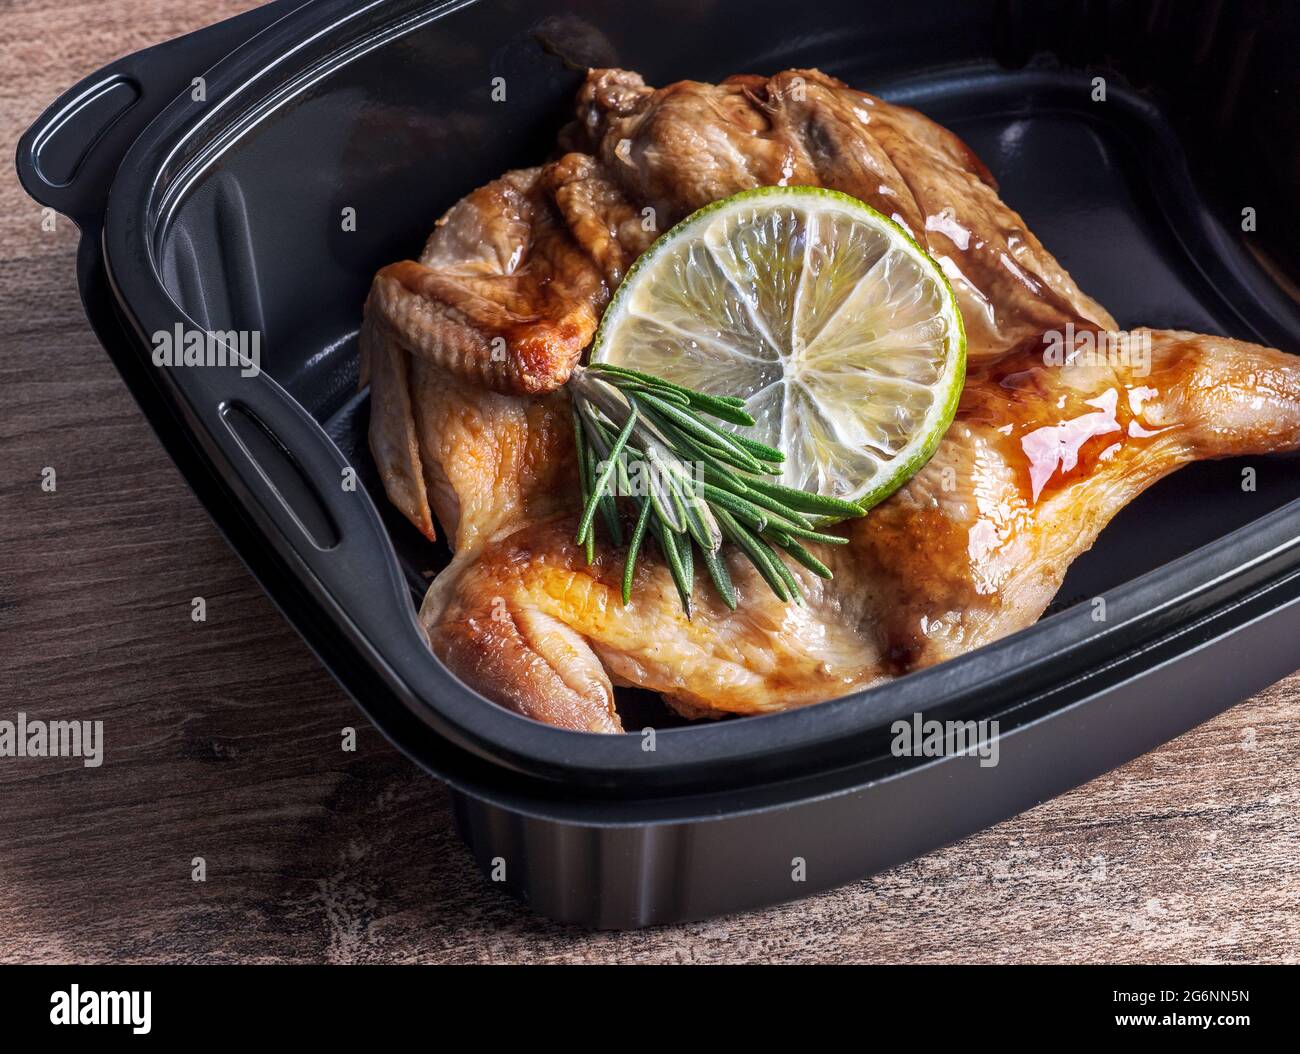 Roasted meat of a whole quail in a microwavable container, top view. Hot meal takeaway food service to home in a restaurant. Stock Photo